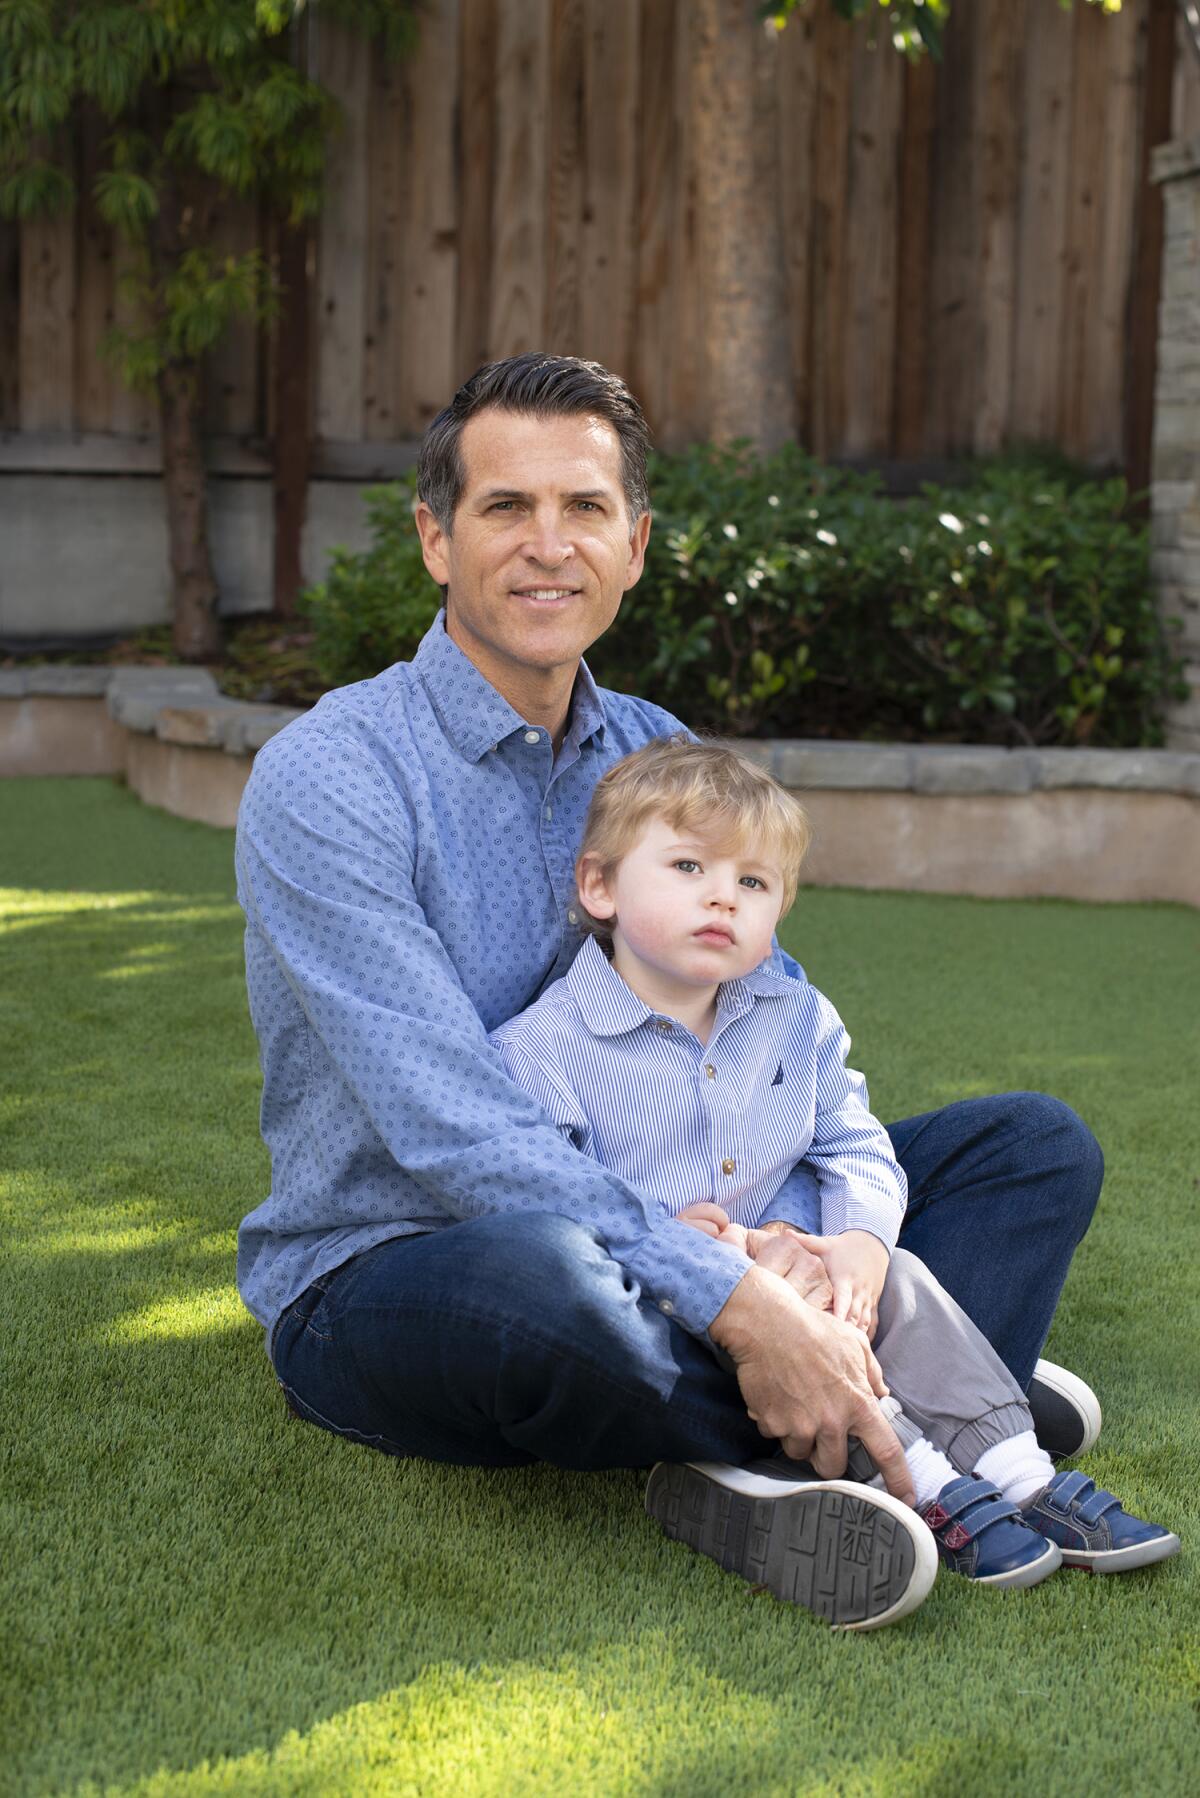 Dr. Justin West with his son, Andrew.